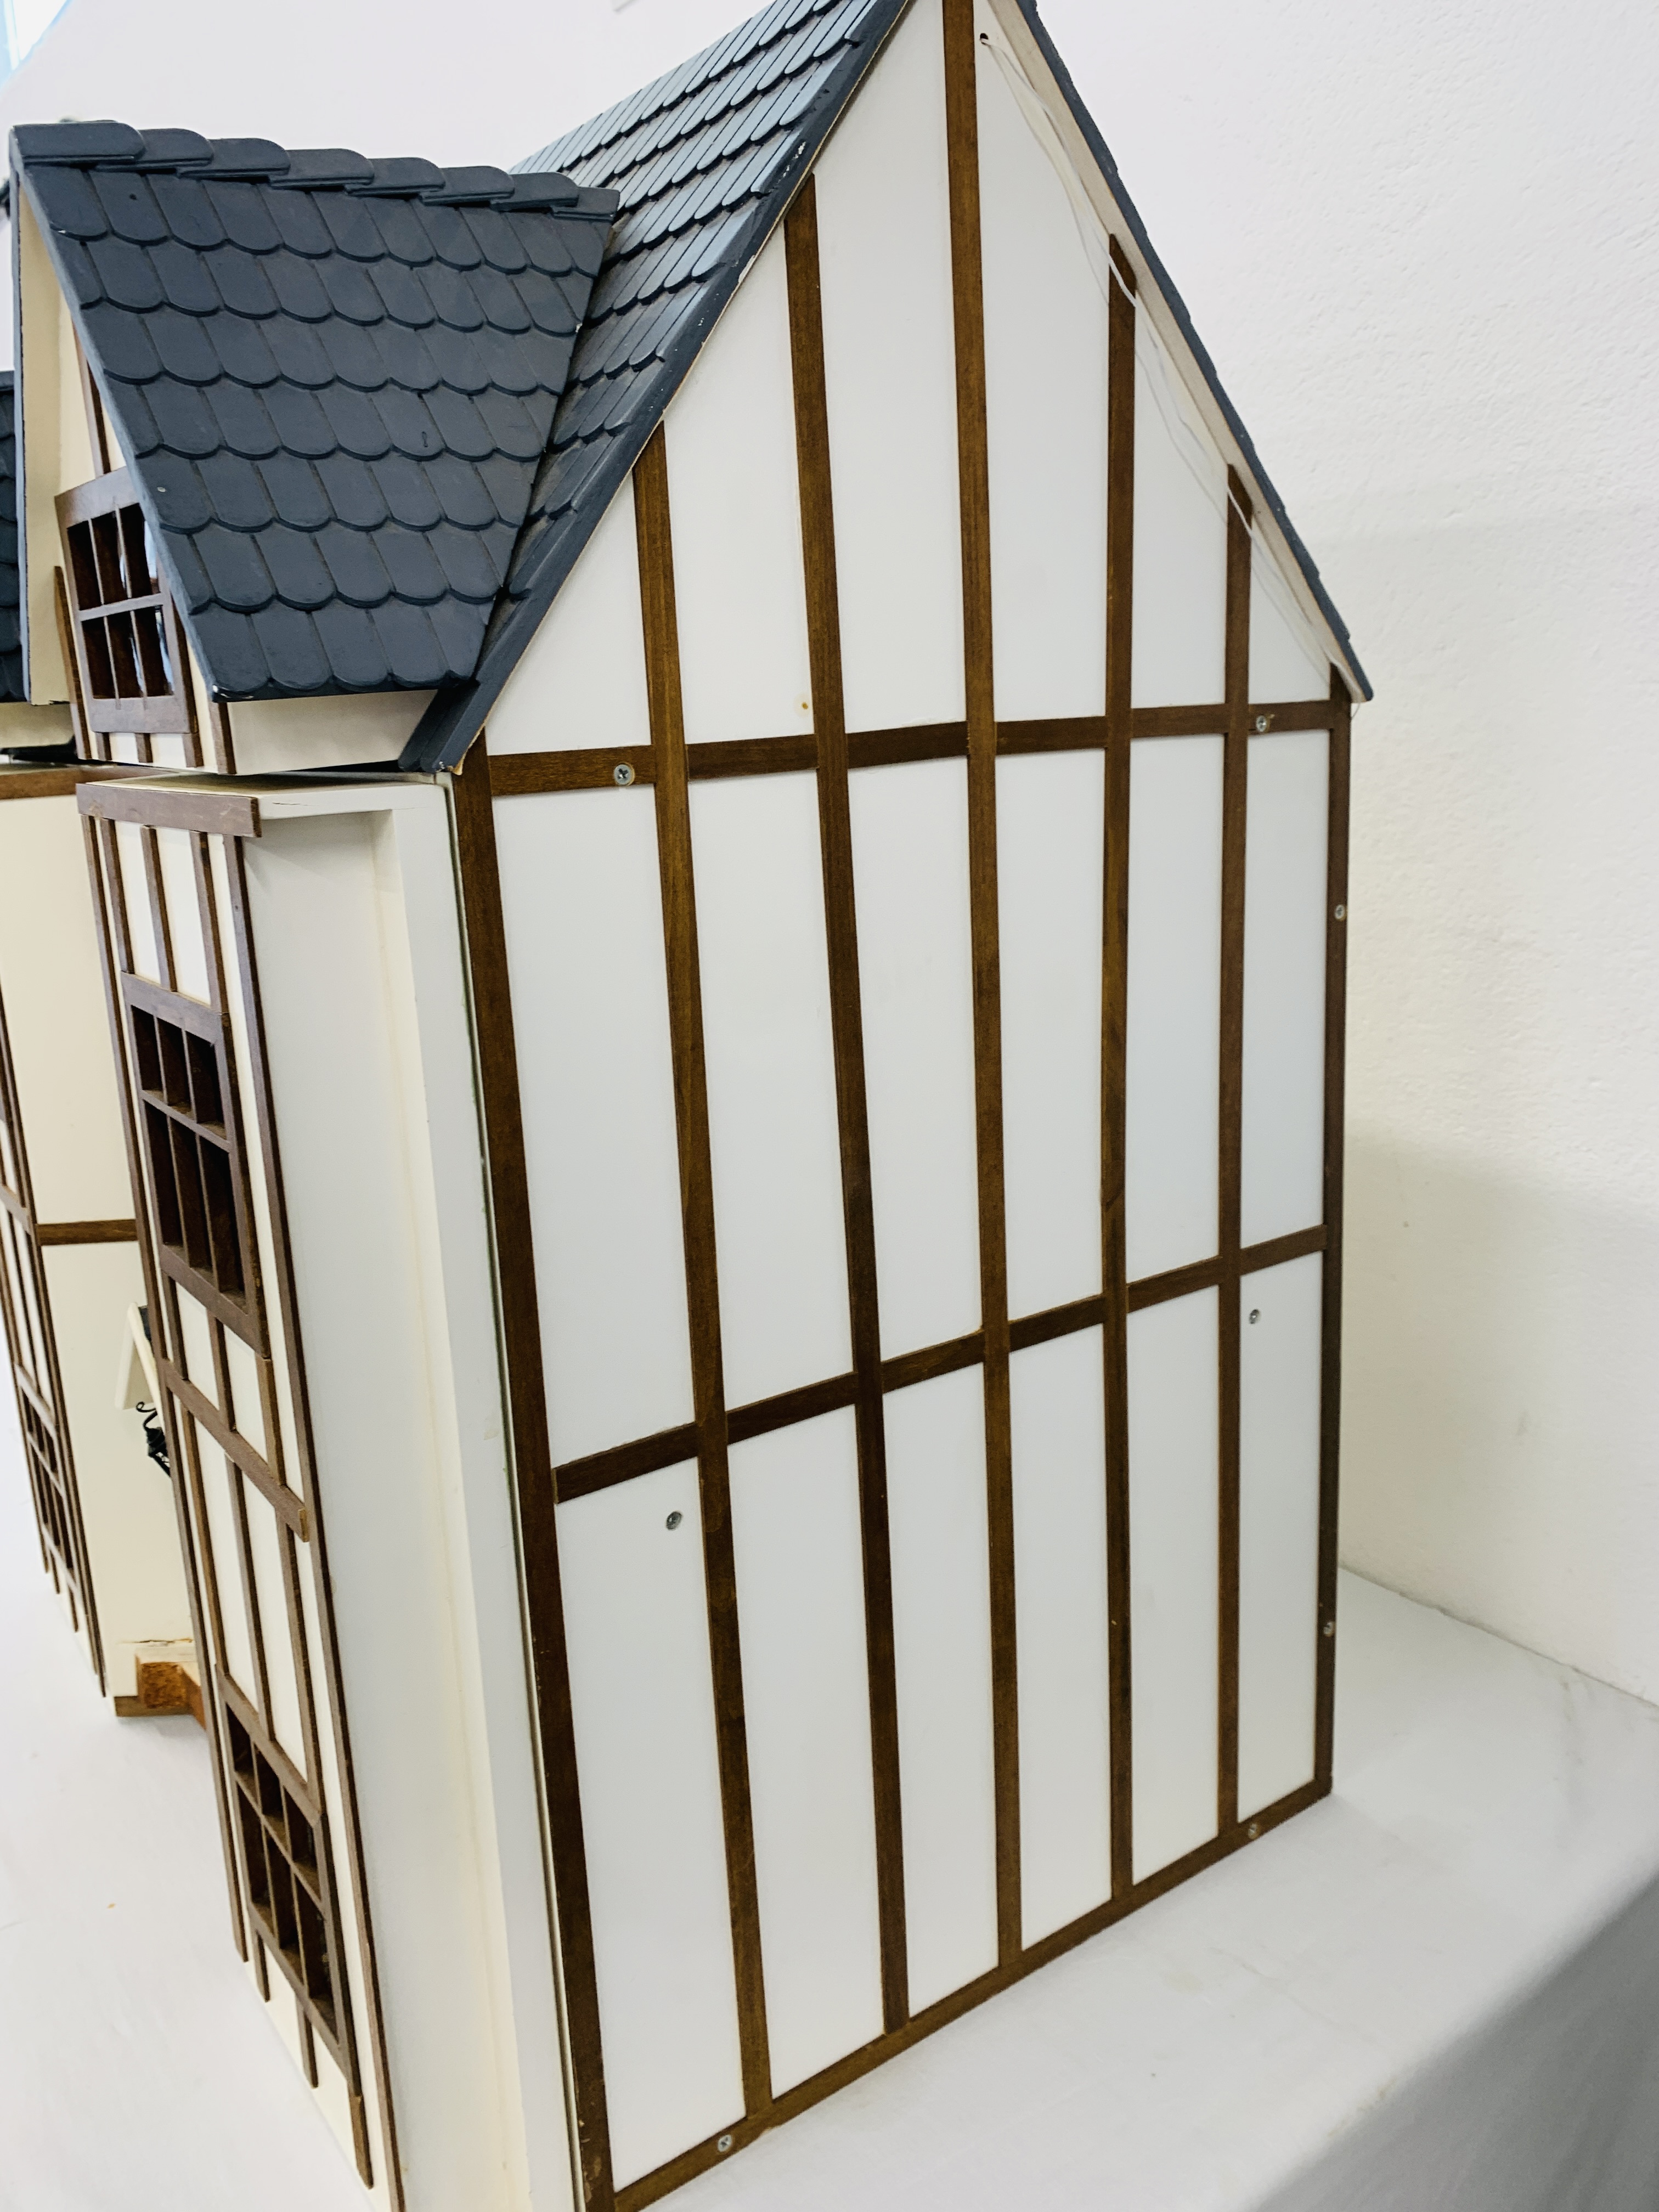 THREE STOREY DOLLS HOUSE ALONG WITH VARIOUS MINIATURE DOLLS HOUSE FURNITURE H 69CM, W 59CM, D 42CM. - Image 6 of 12